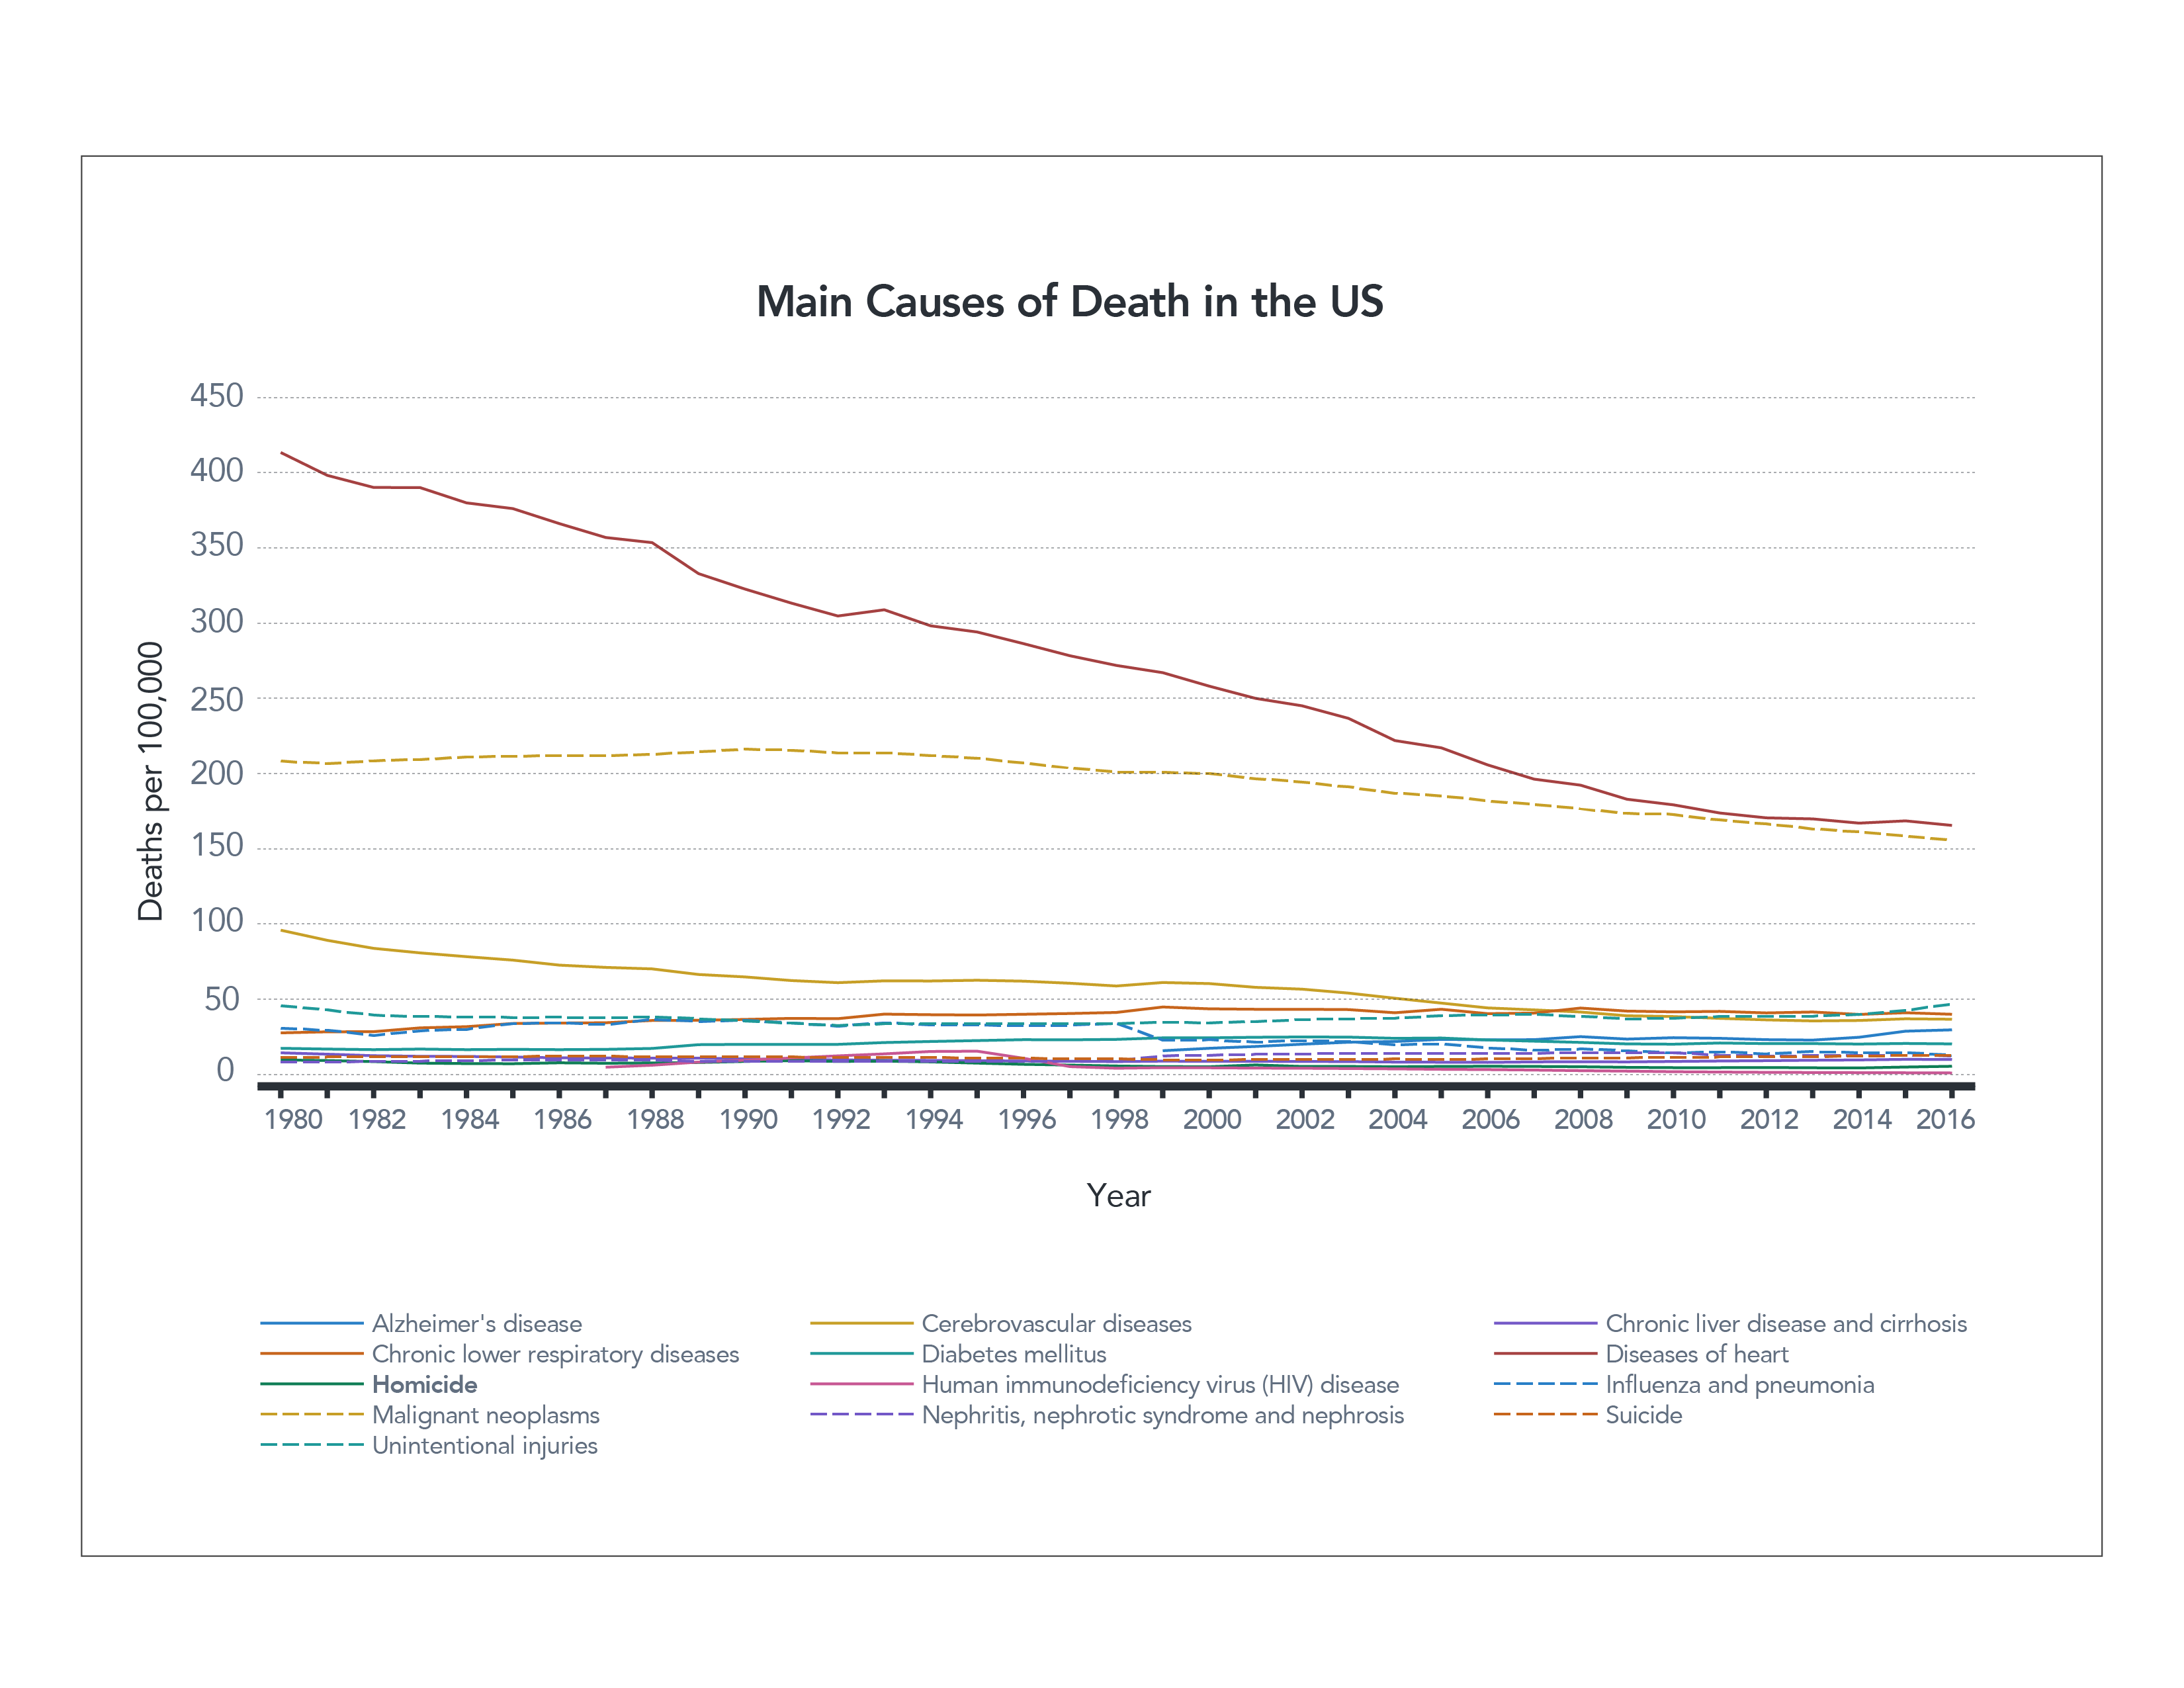 Figure 6. Main Causes of Death in the US (linear axis)